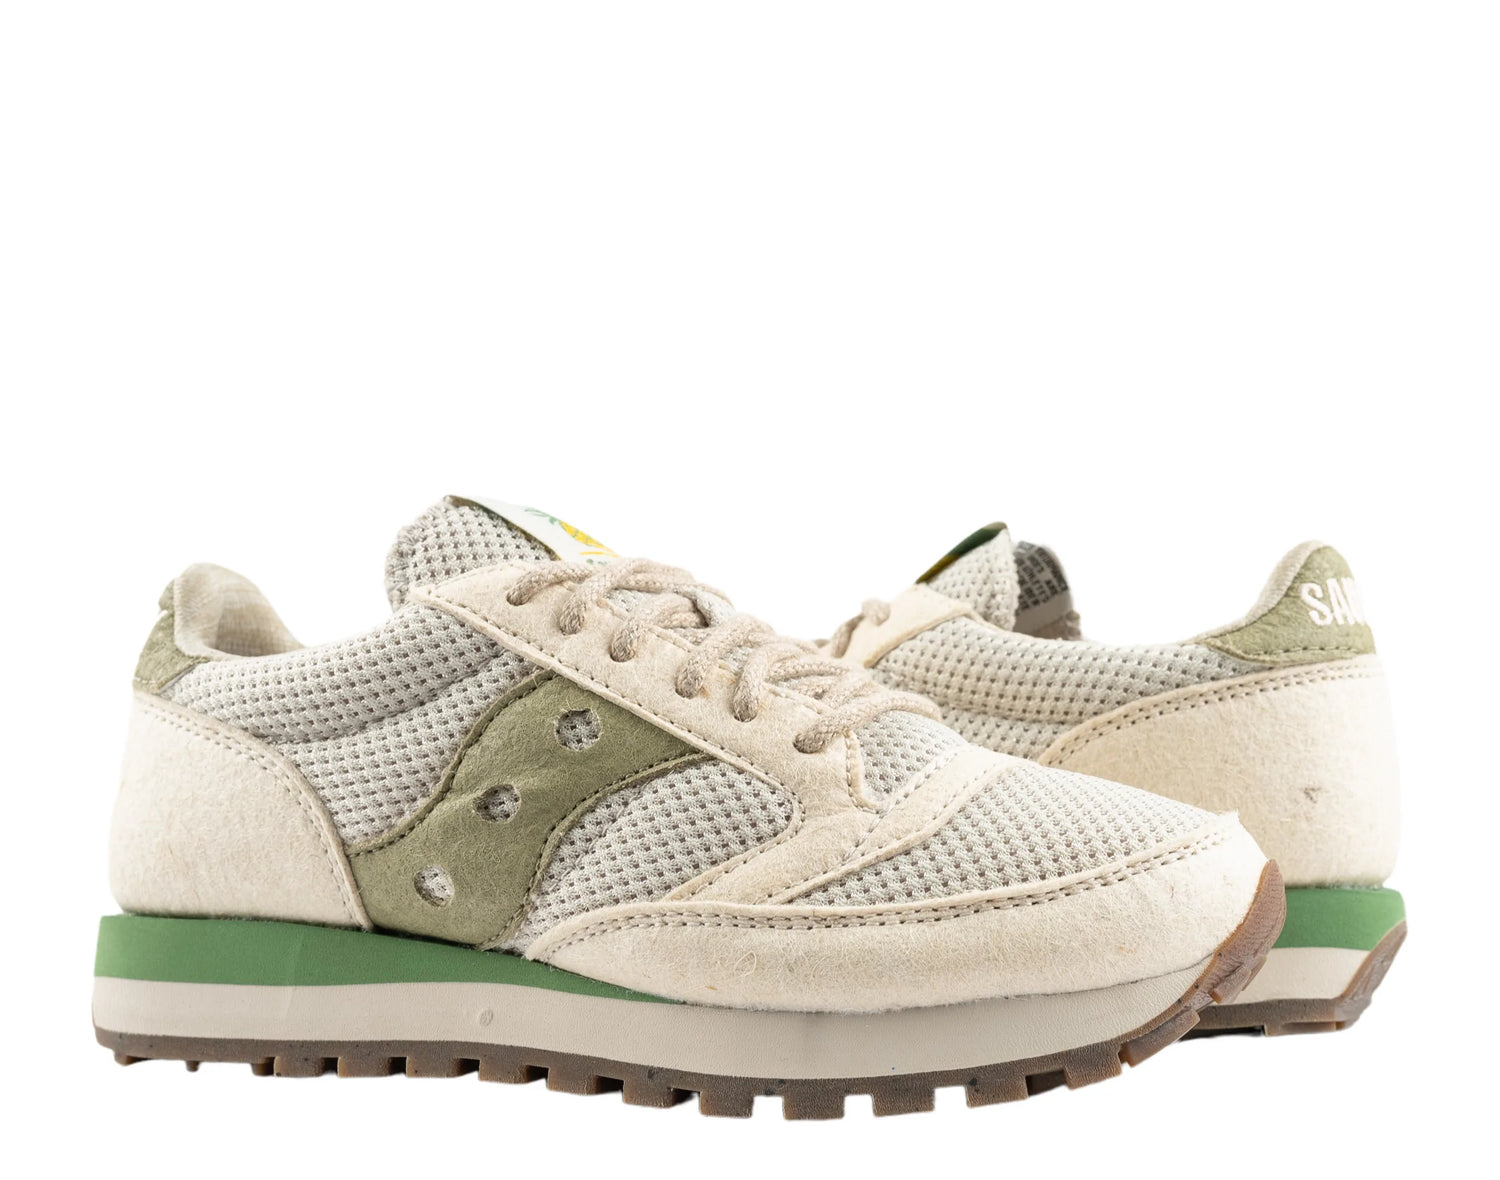 Saucony - Best Sellers